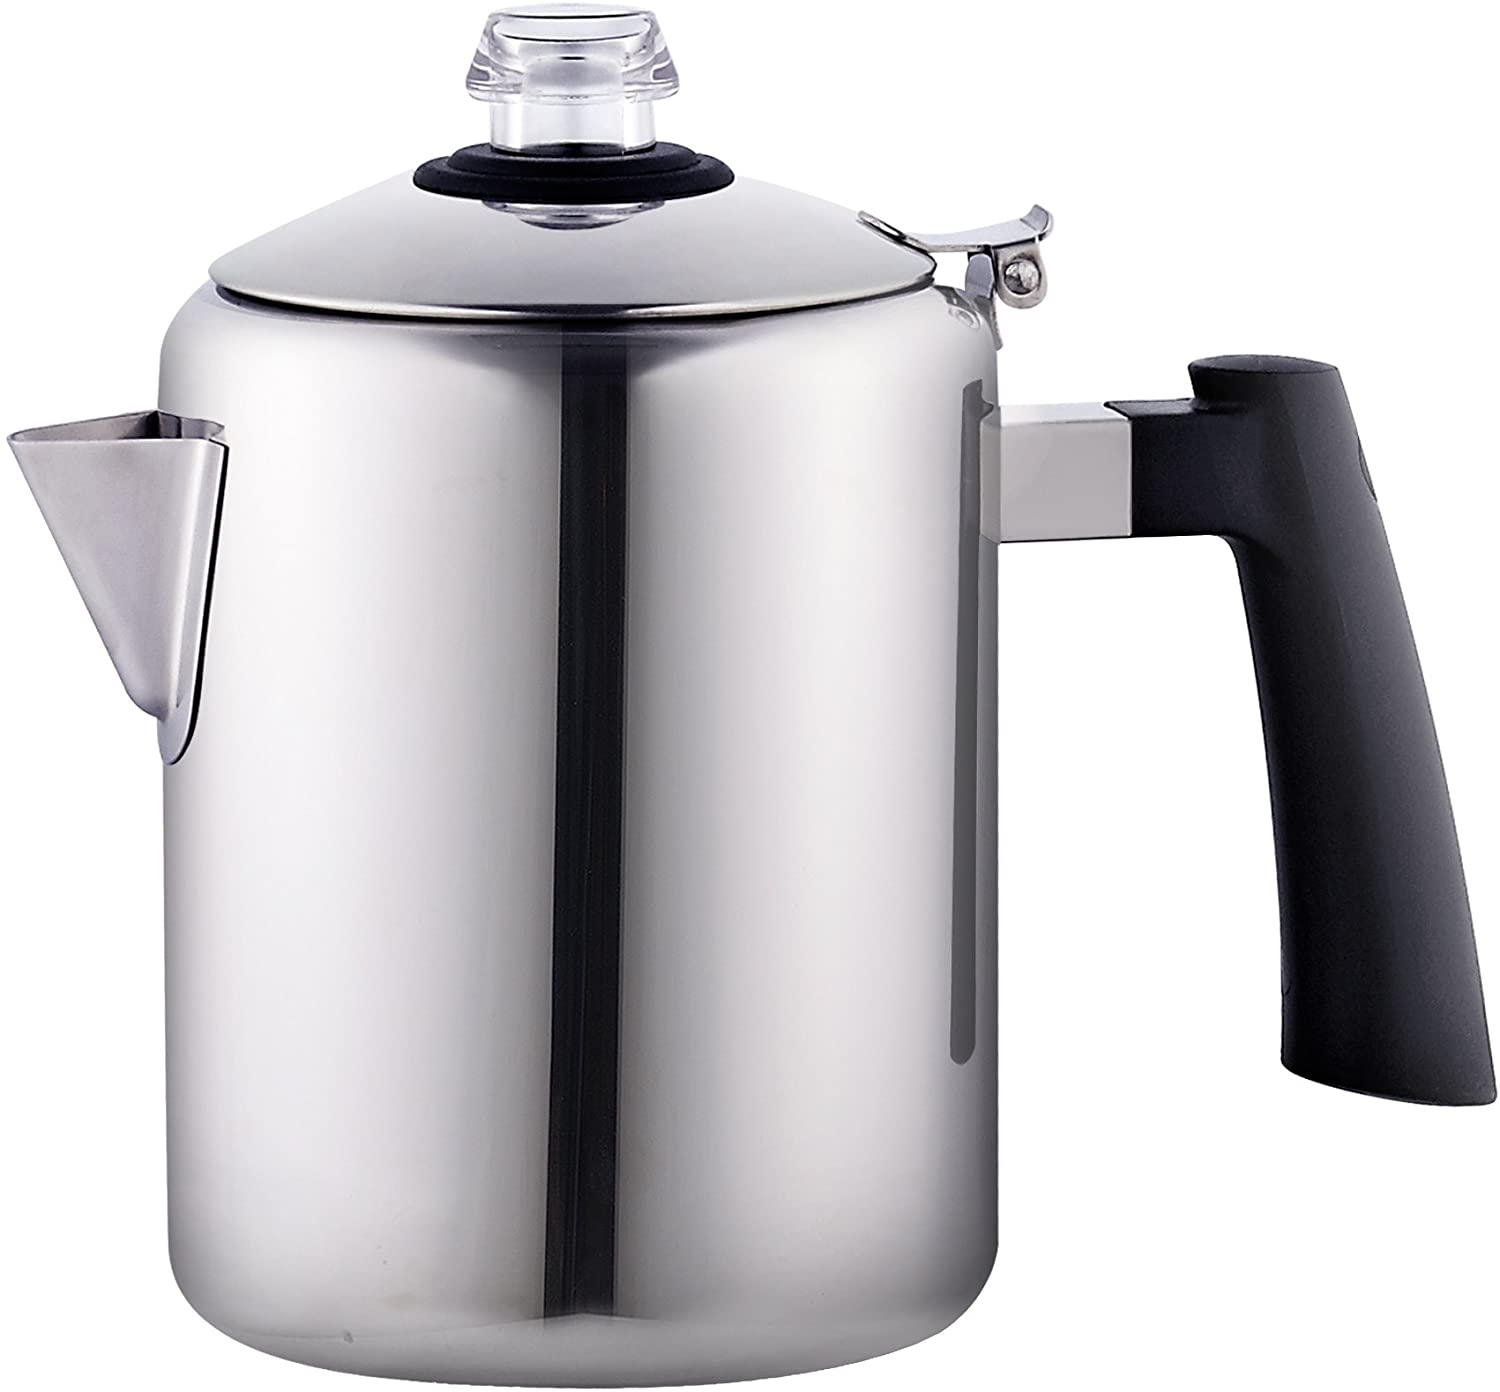 Cook N Home Stainless Steel Stovetop Coffee Percolator, 8-Cup